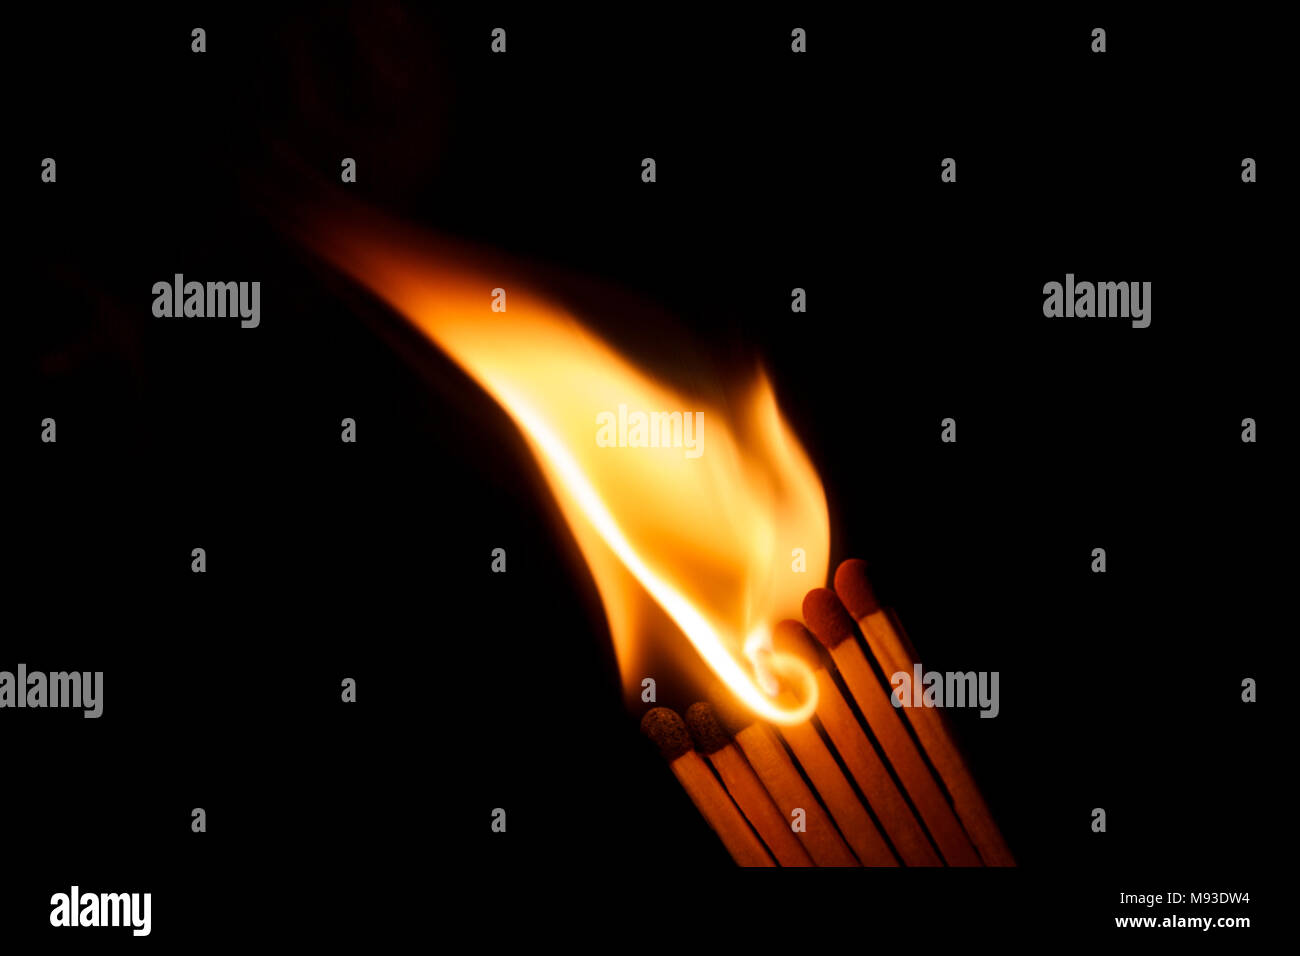 A row of matches is being ignited, spreading the fire Stock Photo